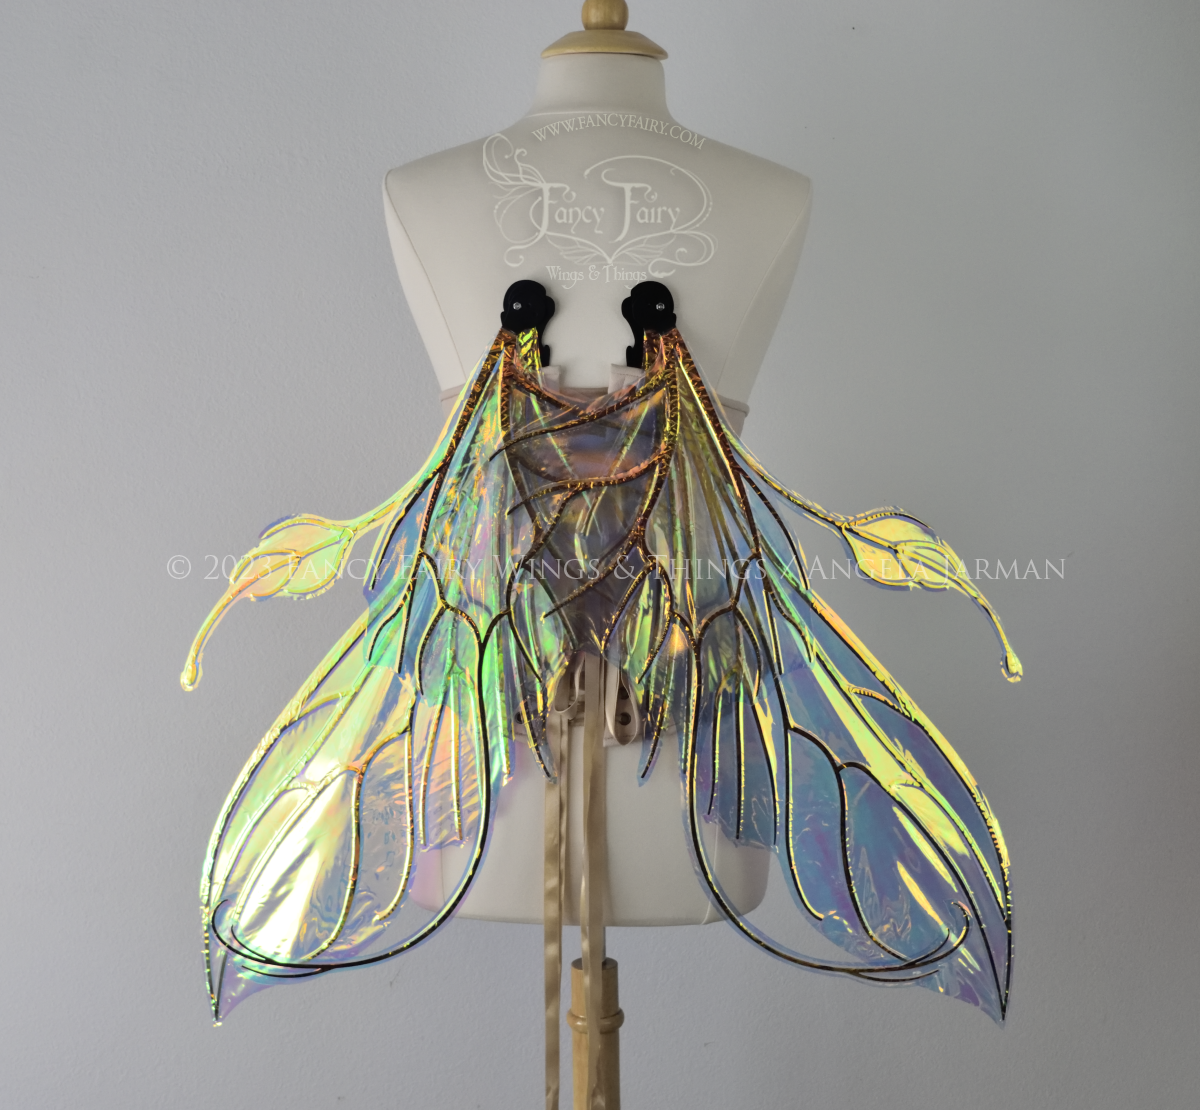 Back view of an ivory dress form wearing an alabaster underbust corset & extra large iridescent fairy wings (in resting position pointed downward) with elongated upper panels & antennae with bottom panels that have a tail curving upwards, black veins. Background is white / light grey